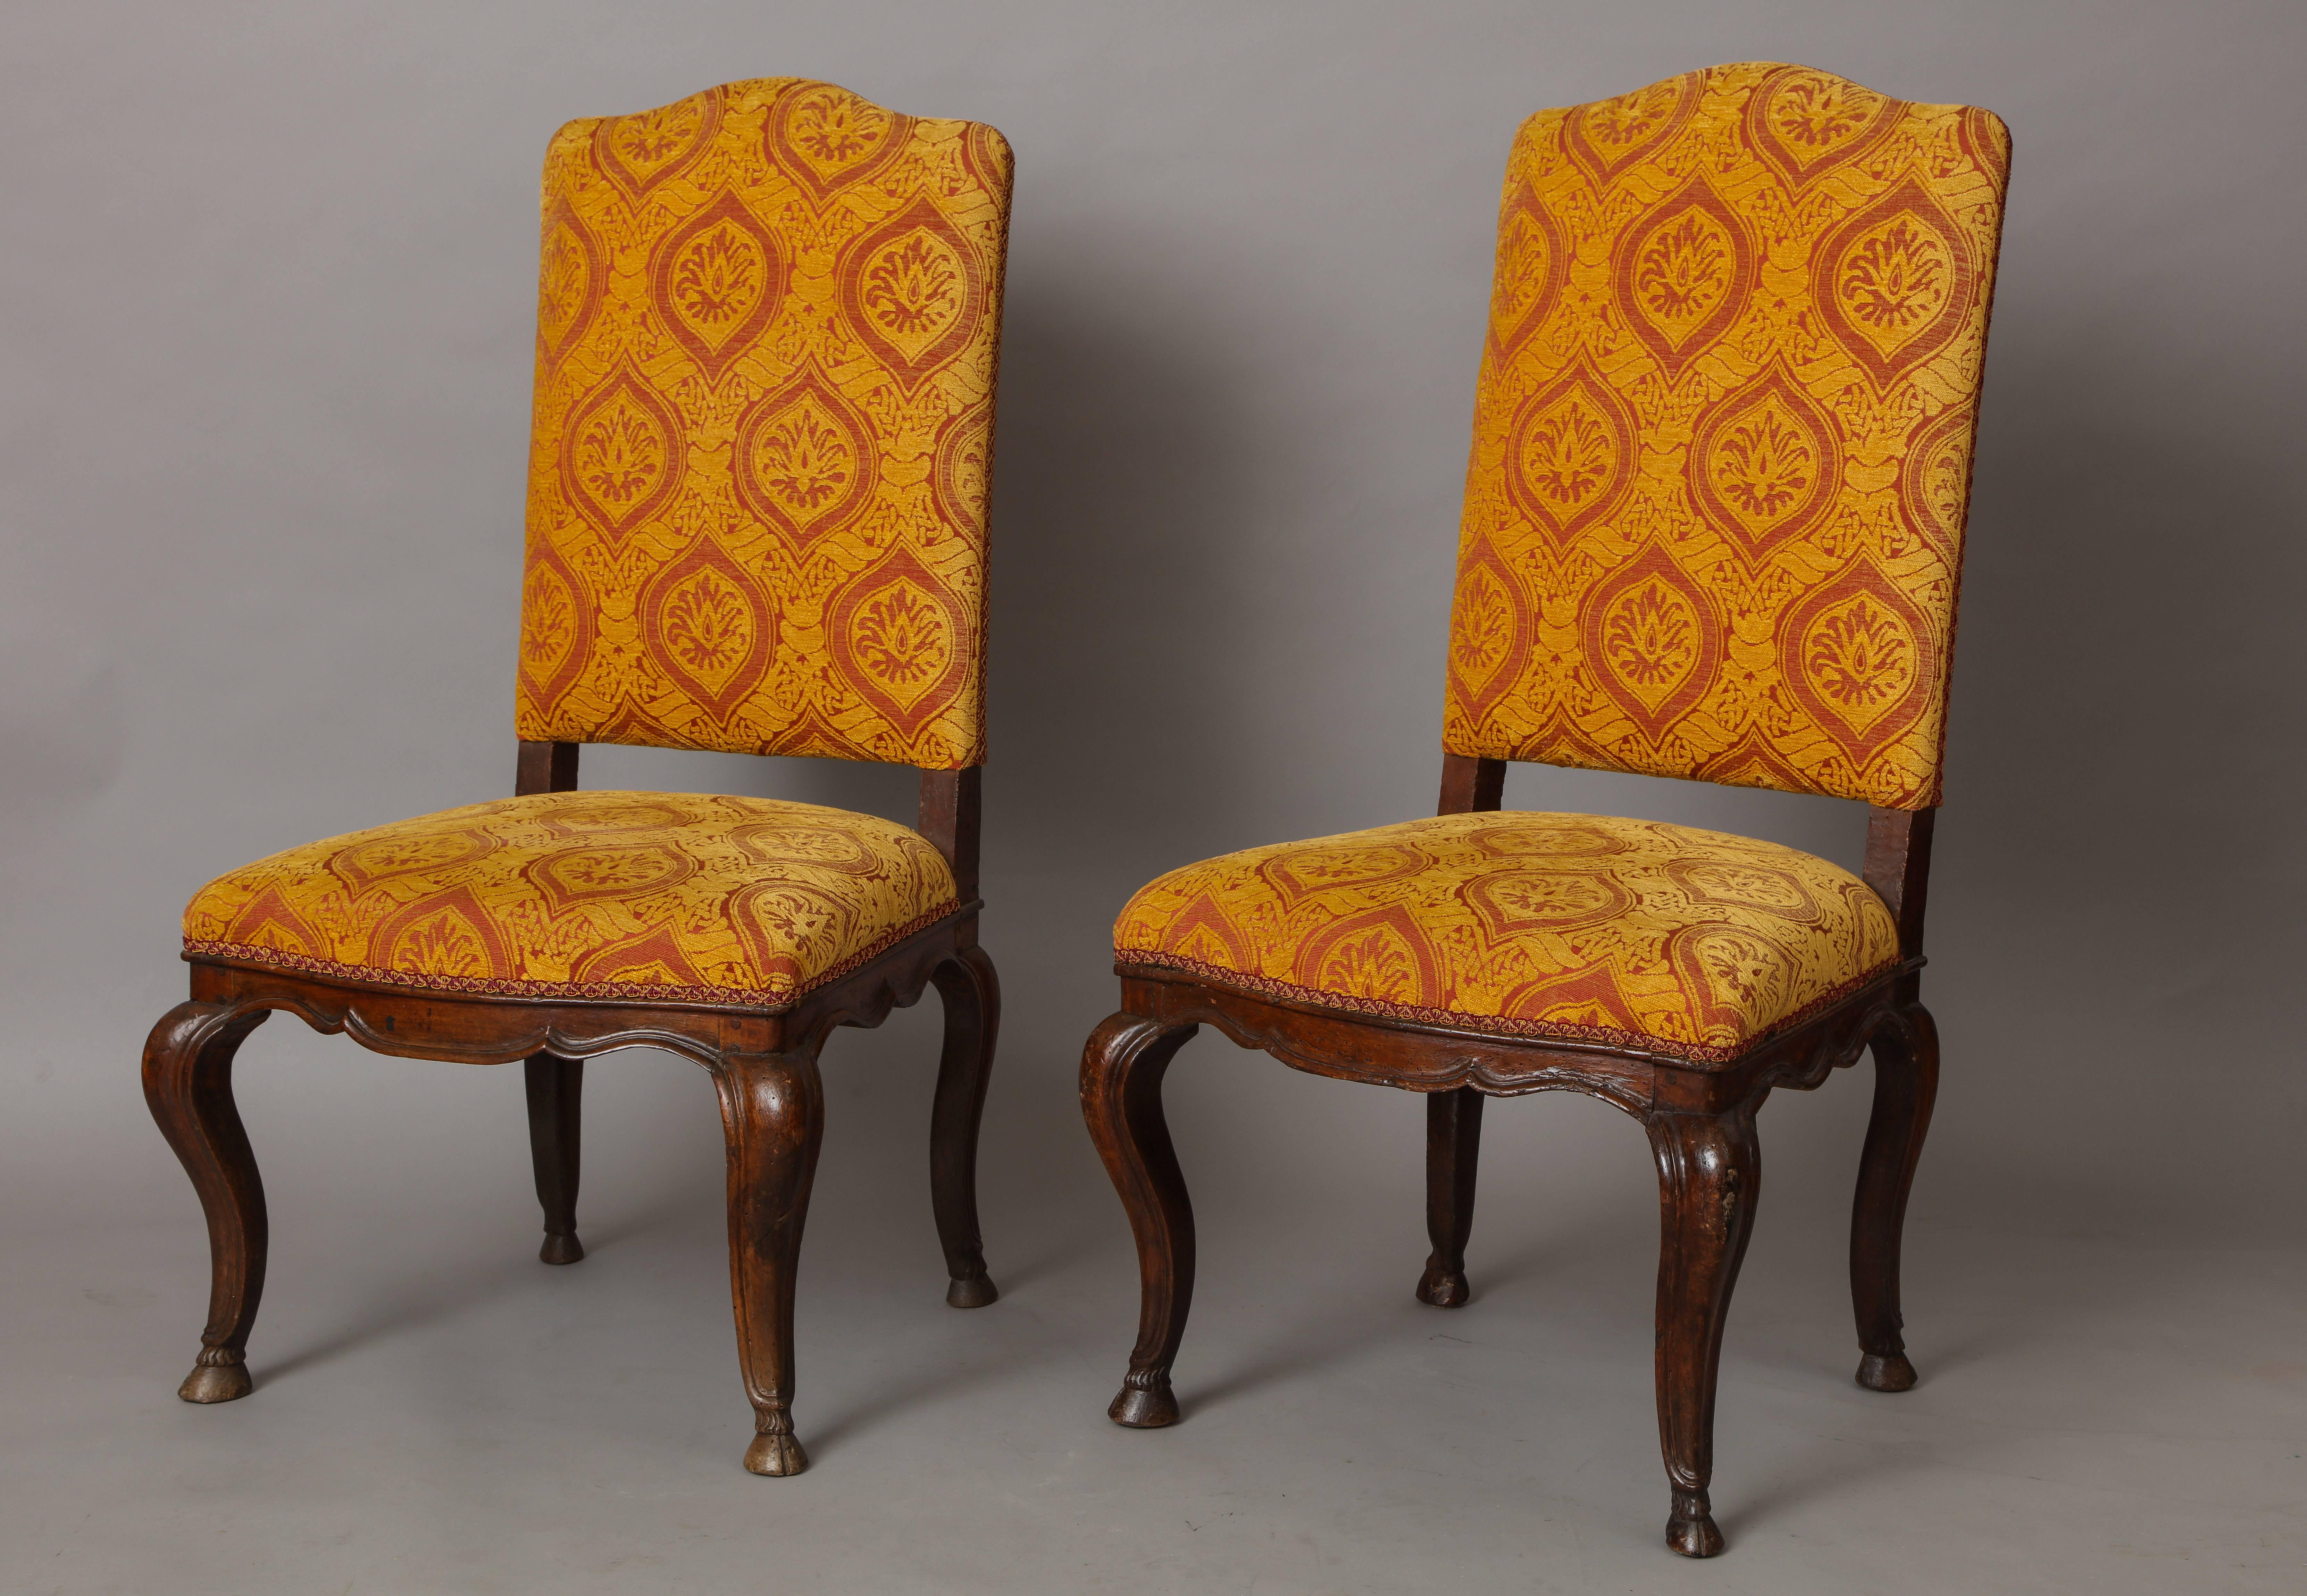 A pair of Italian exuberantly carved walnut side chairs with dramatic cabriole legs and carved aprons, upholstered in a sumptuous patterned velvet.
Milan, Italy, early 18th century.
   